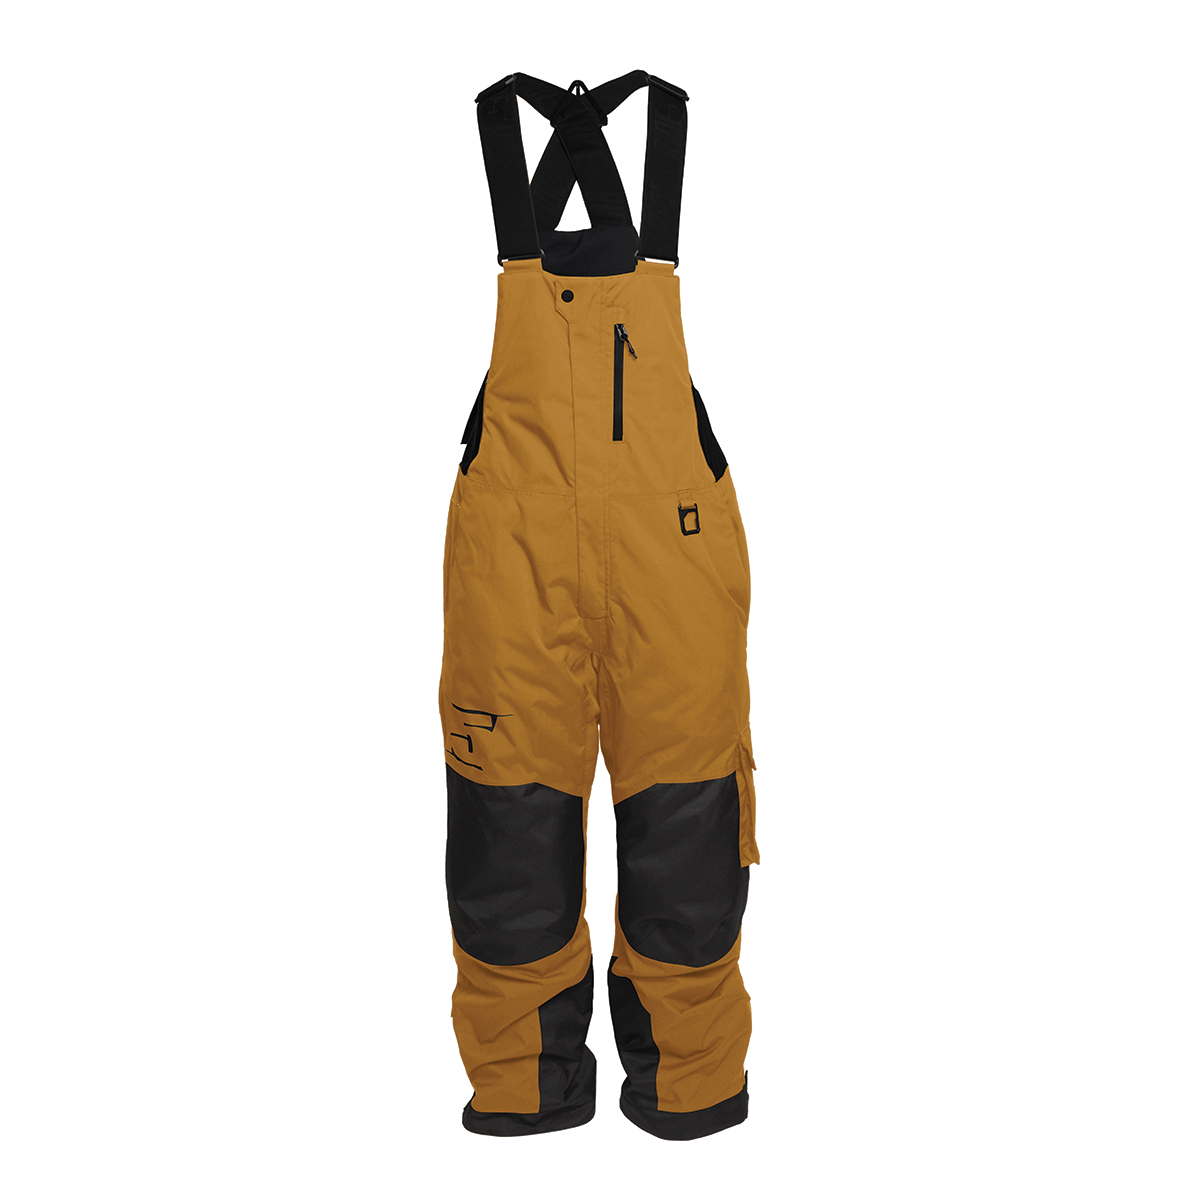 509 insulated pants for men temper overalls